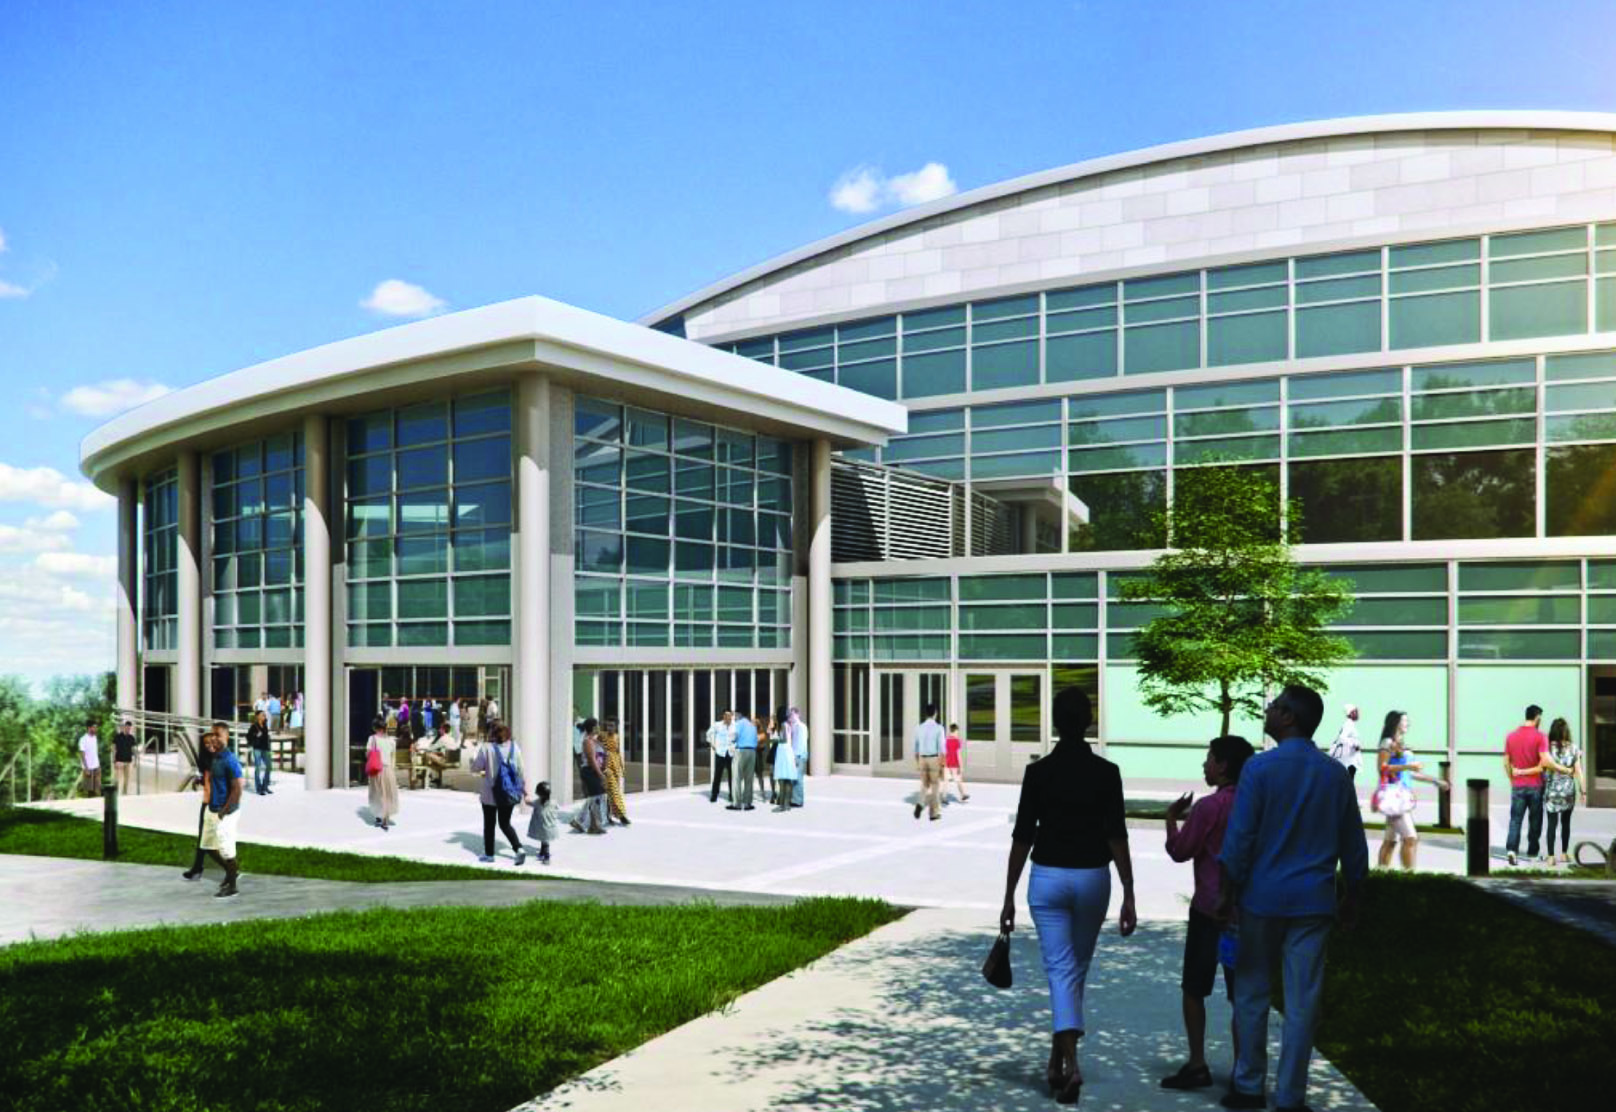 The $10 million project will add 5,000 square feet to the North Bethesda venue by enclosing its Bou Terrace, which will add 200 seats for pre-concert dining and more space for rentals, meetings and smaller performances. Escalators will also be added. (Rendering courtesy of Strathmore)